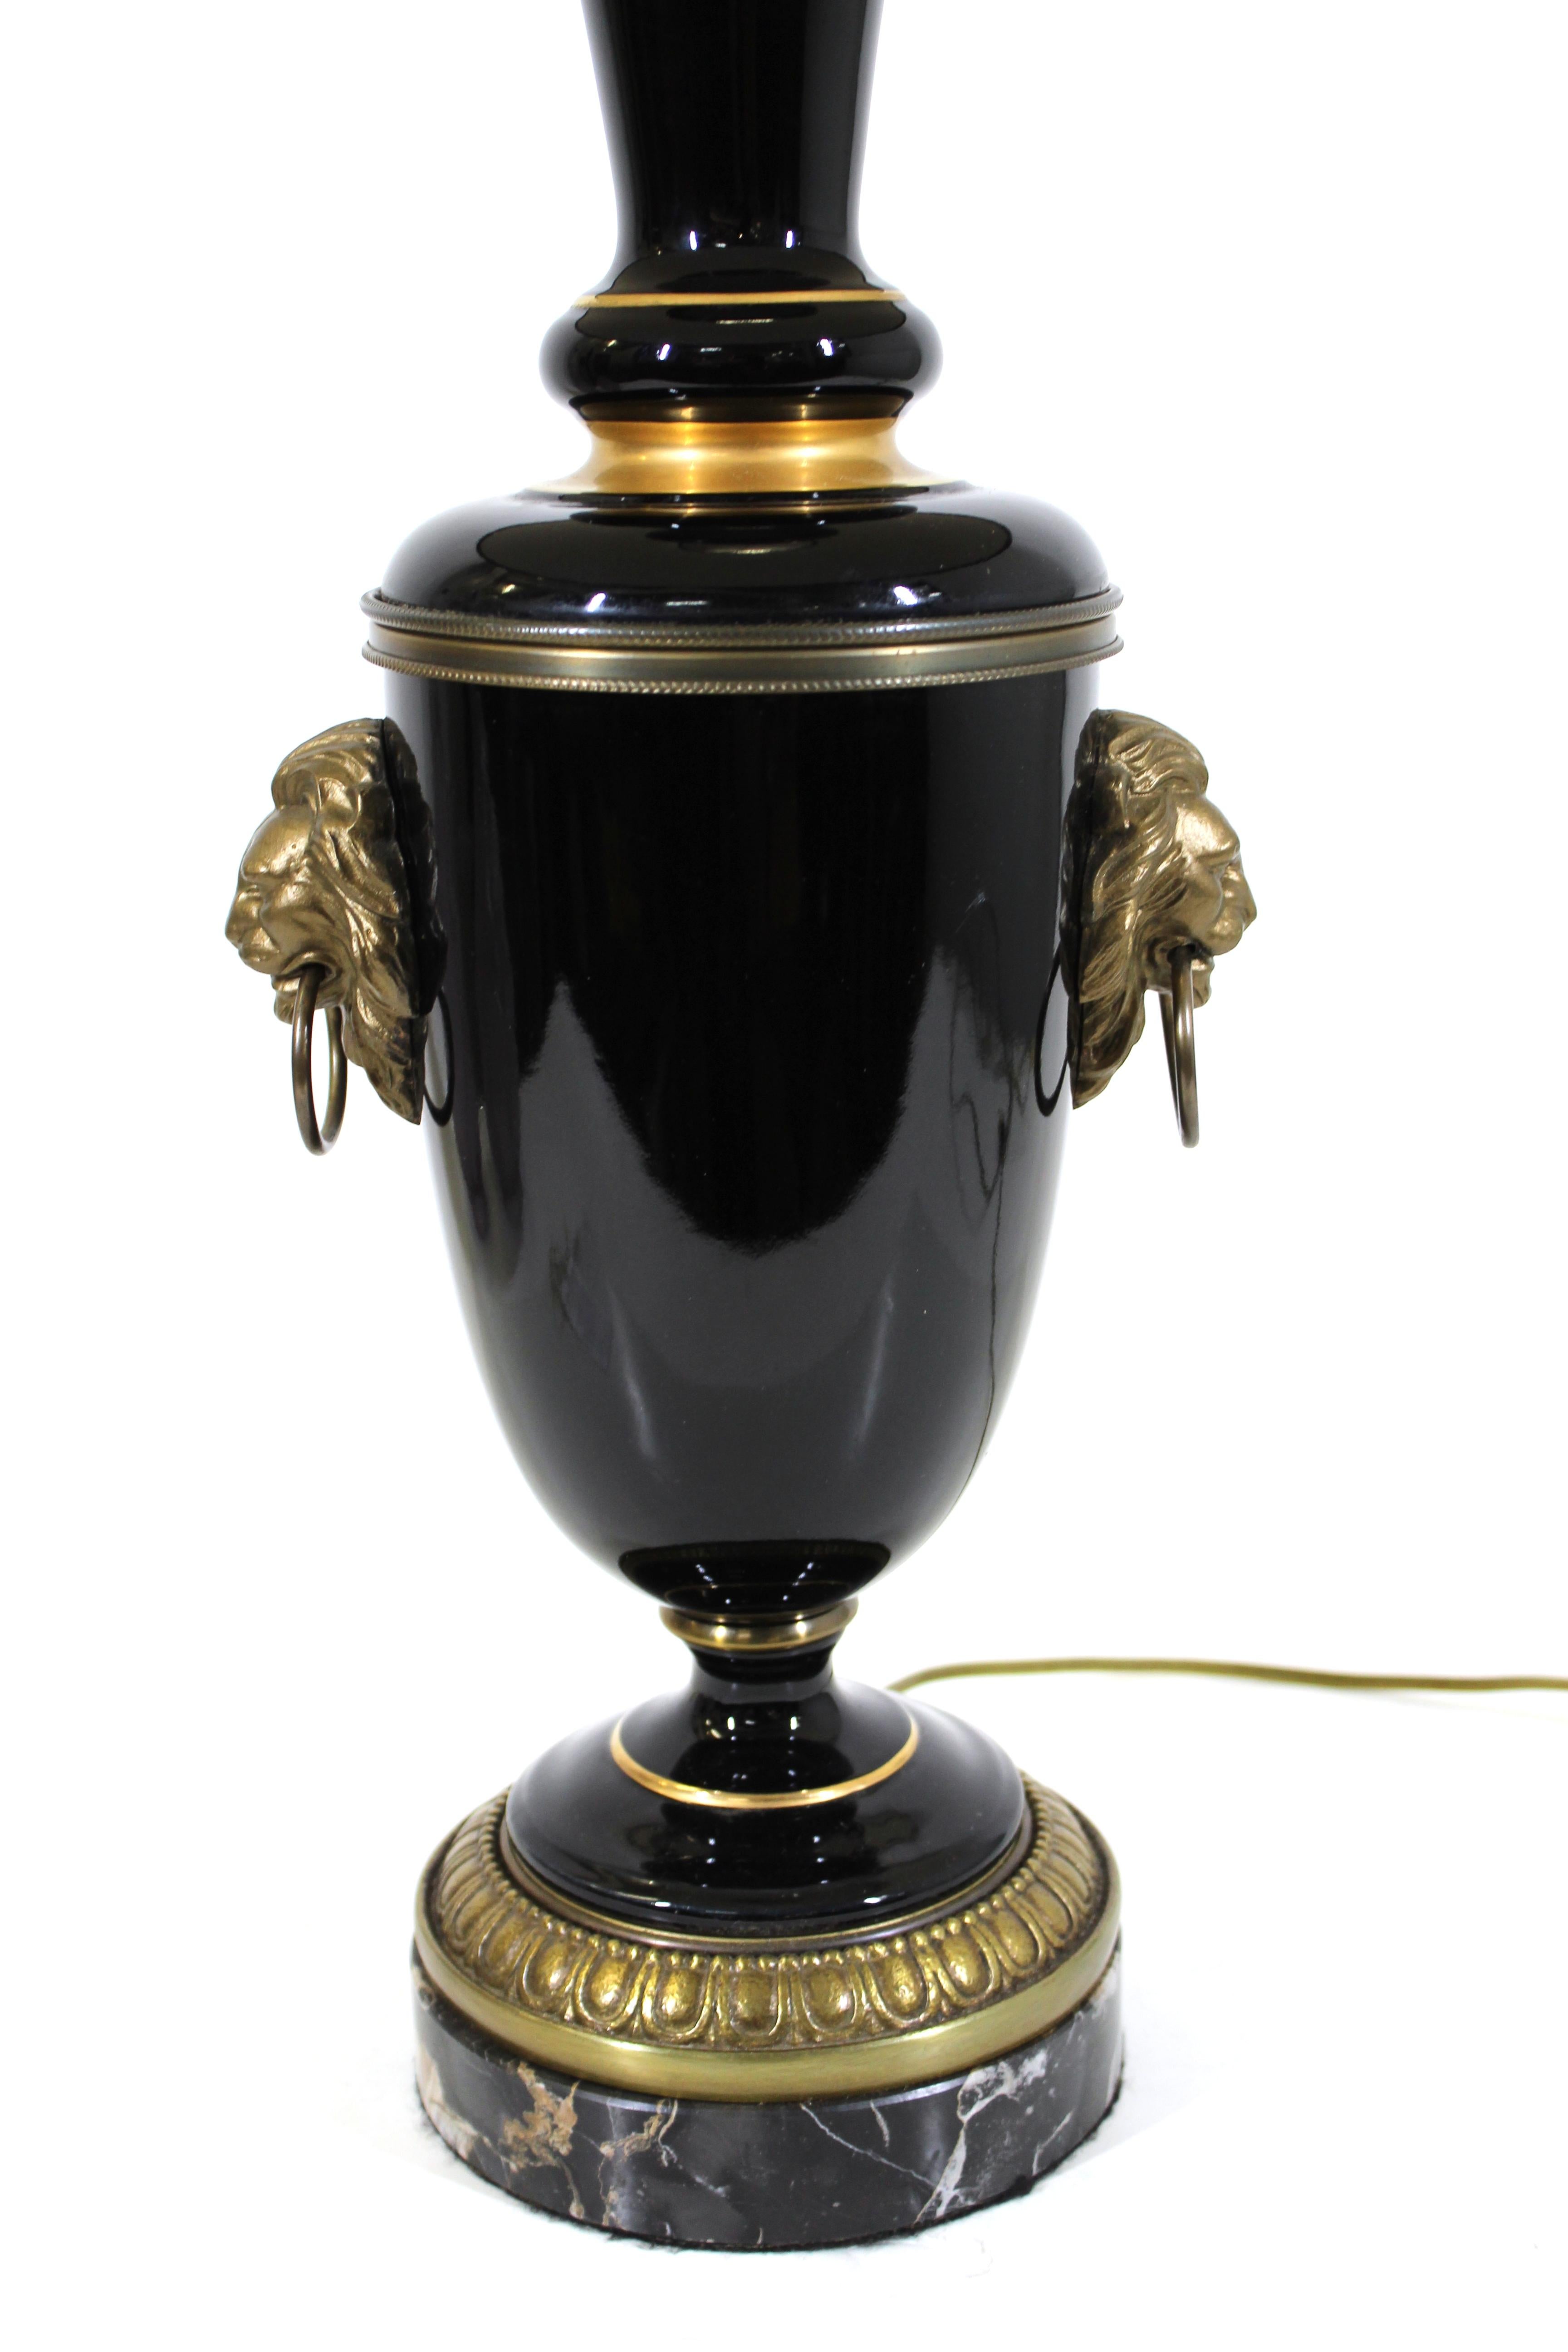 American Art Deco period table lamp in black glass with coordinating black shade. The lamp has a brass lion head on each side and a black base. Made in the USA during the 1930's, and recently rewired.